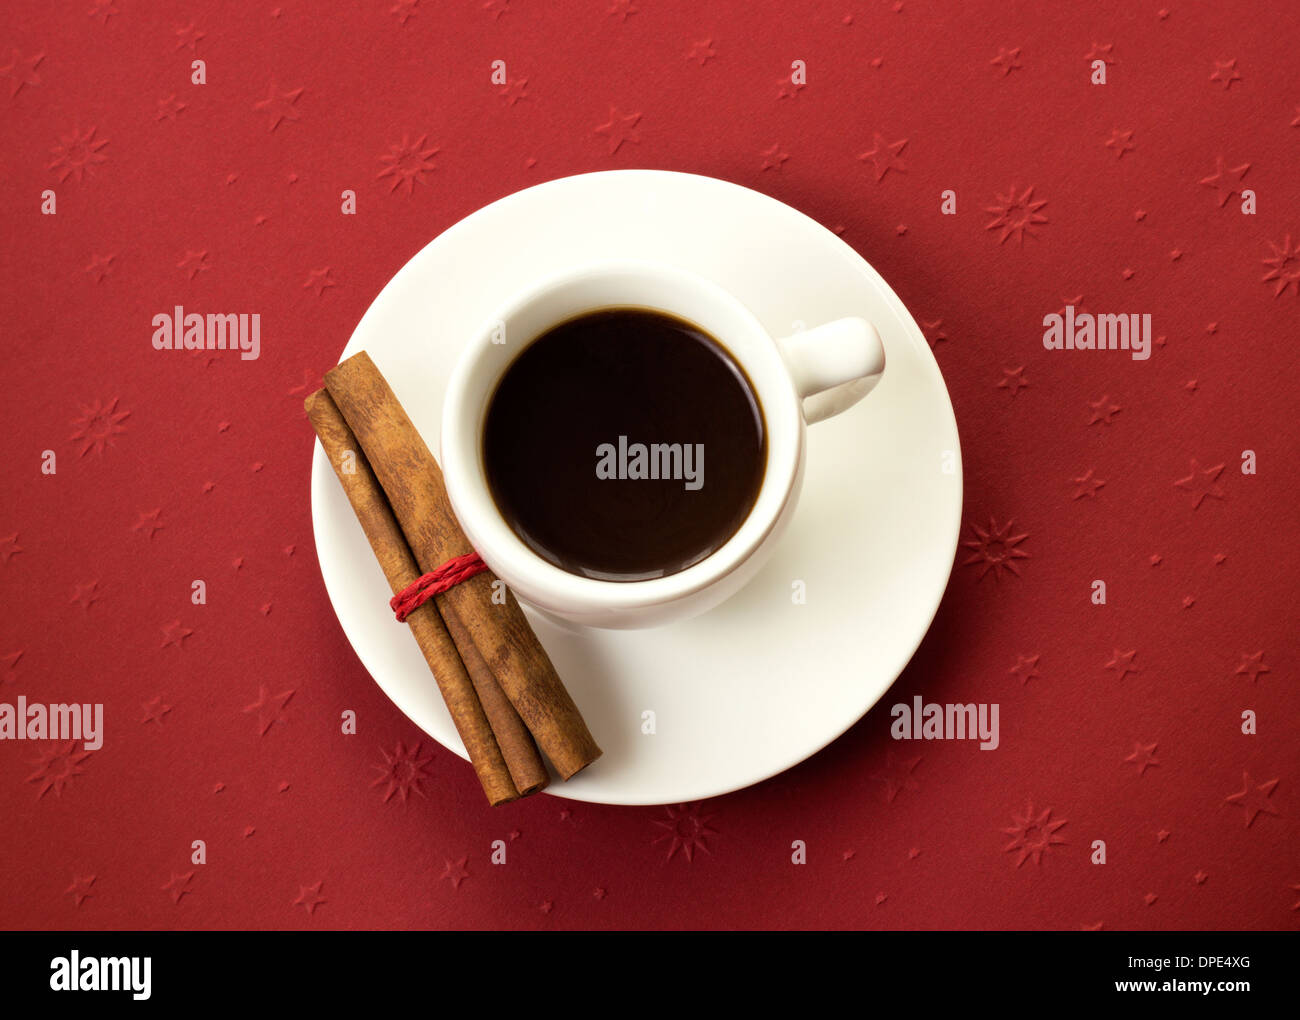 coffee cup with cinnamon sticks on red table Stock Photo